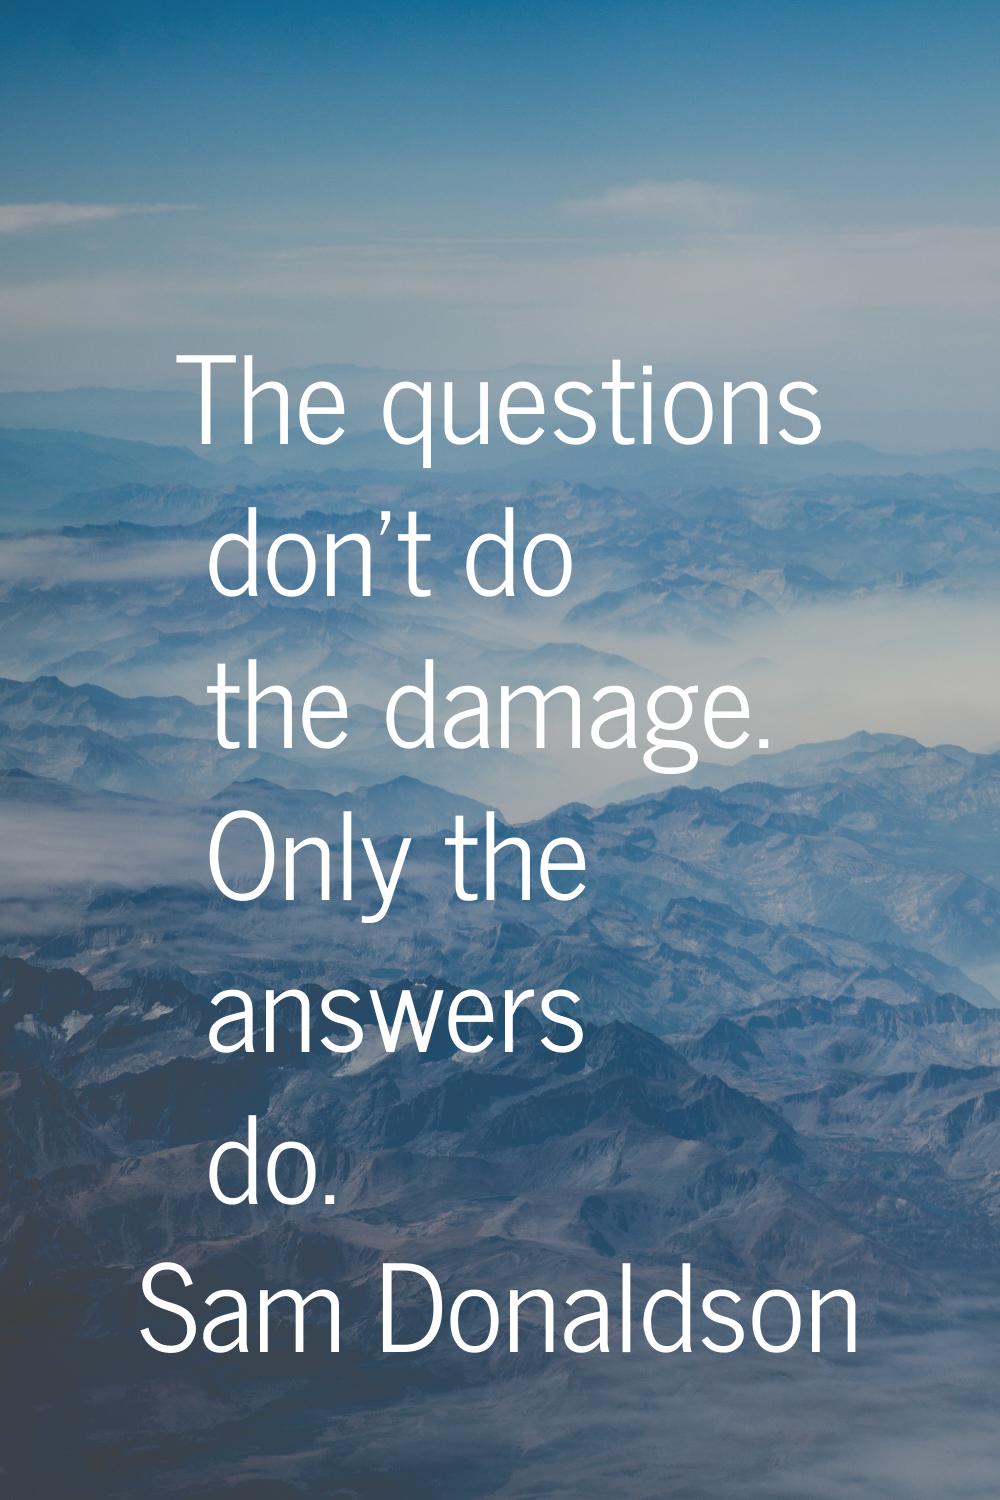 The questions don't do the damage. Only the answers do.